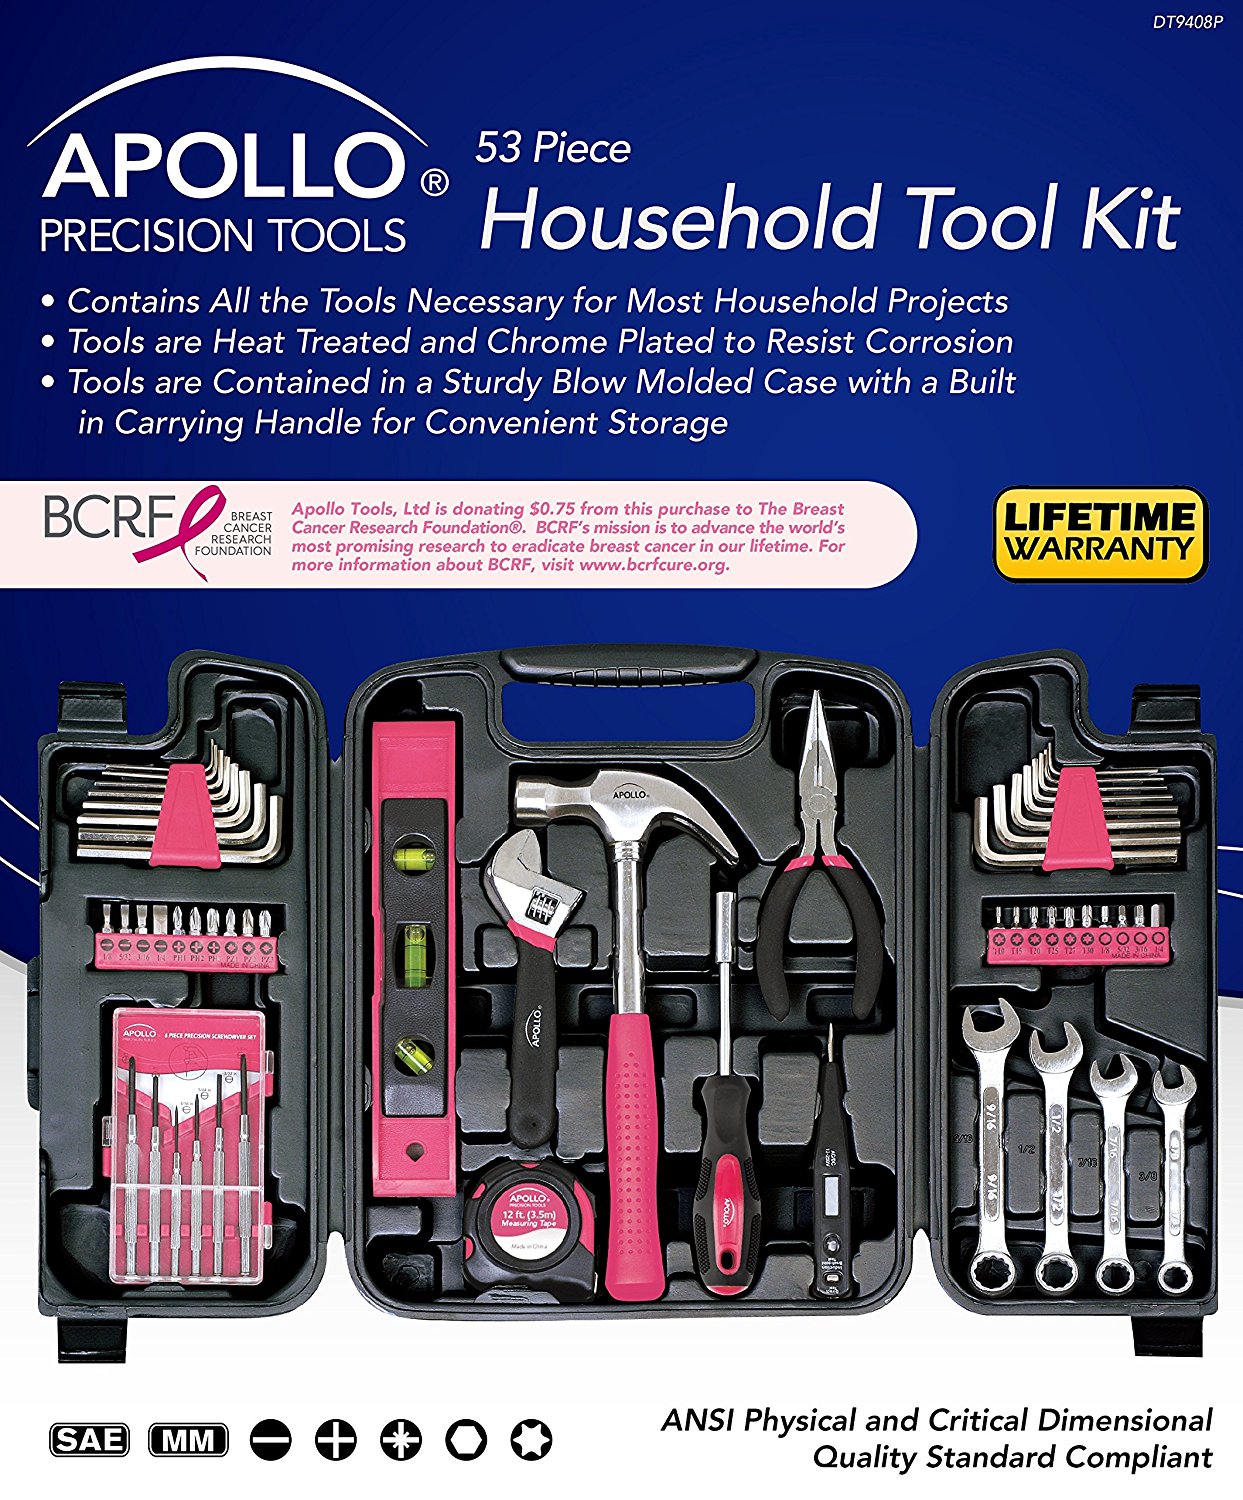 Apollo Tools Dt9408 53 Piece Household Tool Set With Wrenches, Precision Screwdriver Set And Most Reached For Hand Tools In Storage Case - image 3 of 5